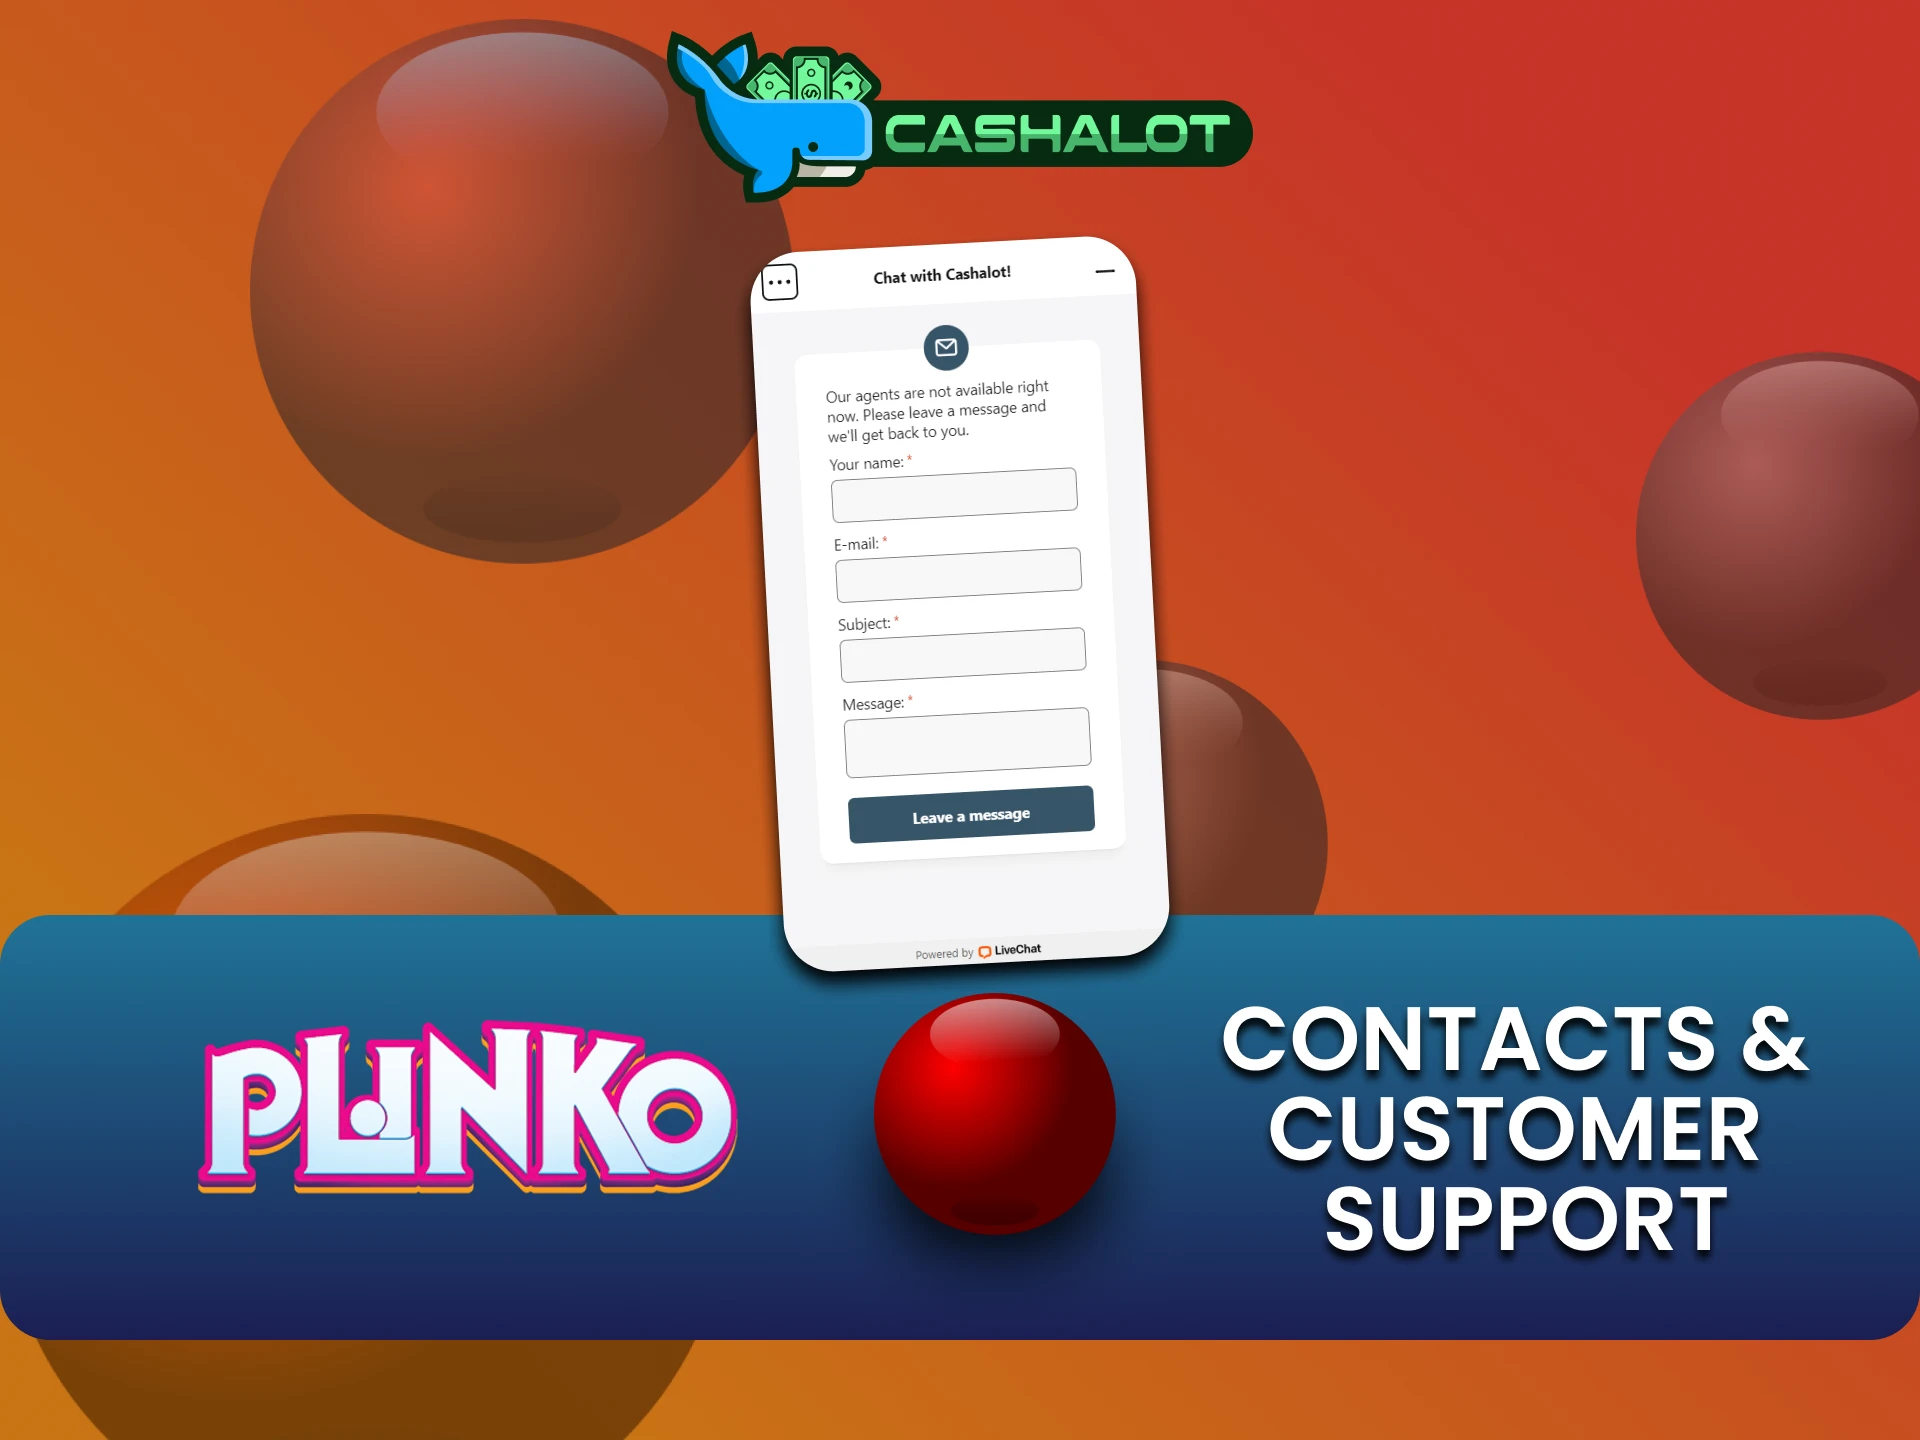 There are several ways to contact the Cashalot team.